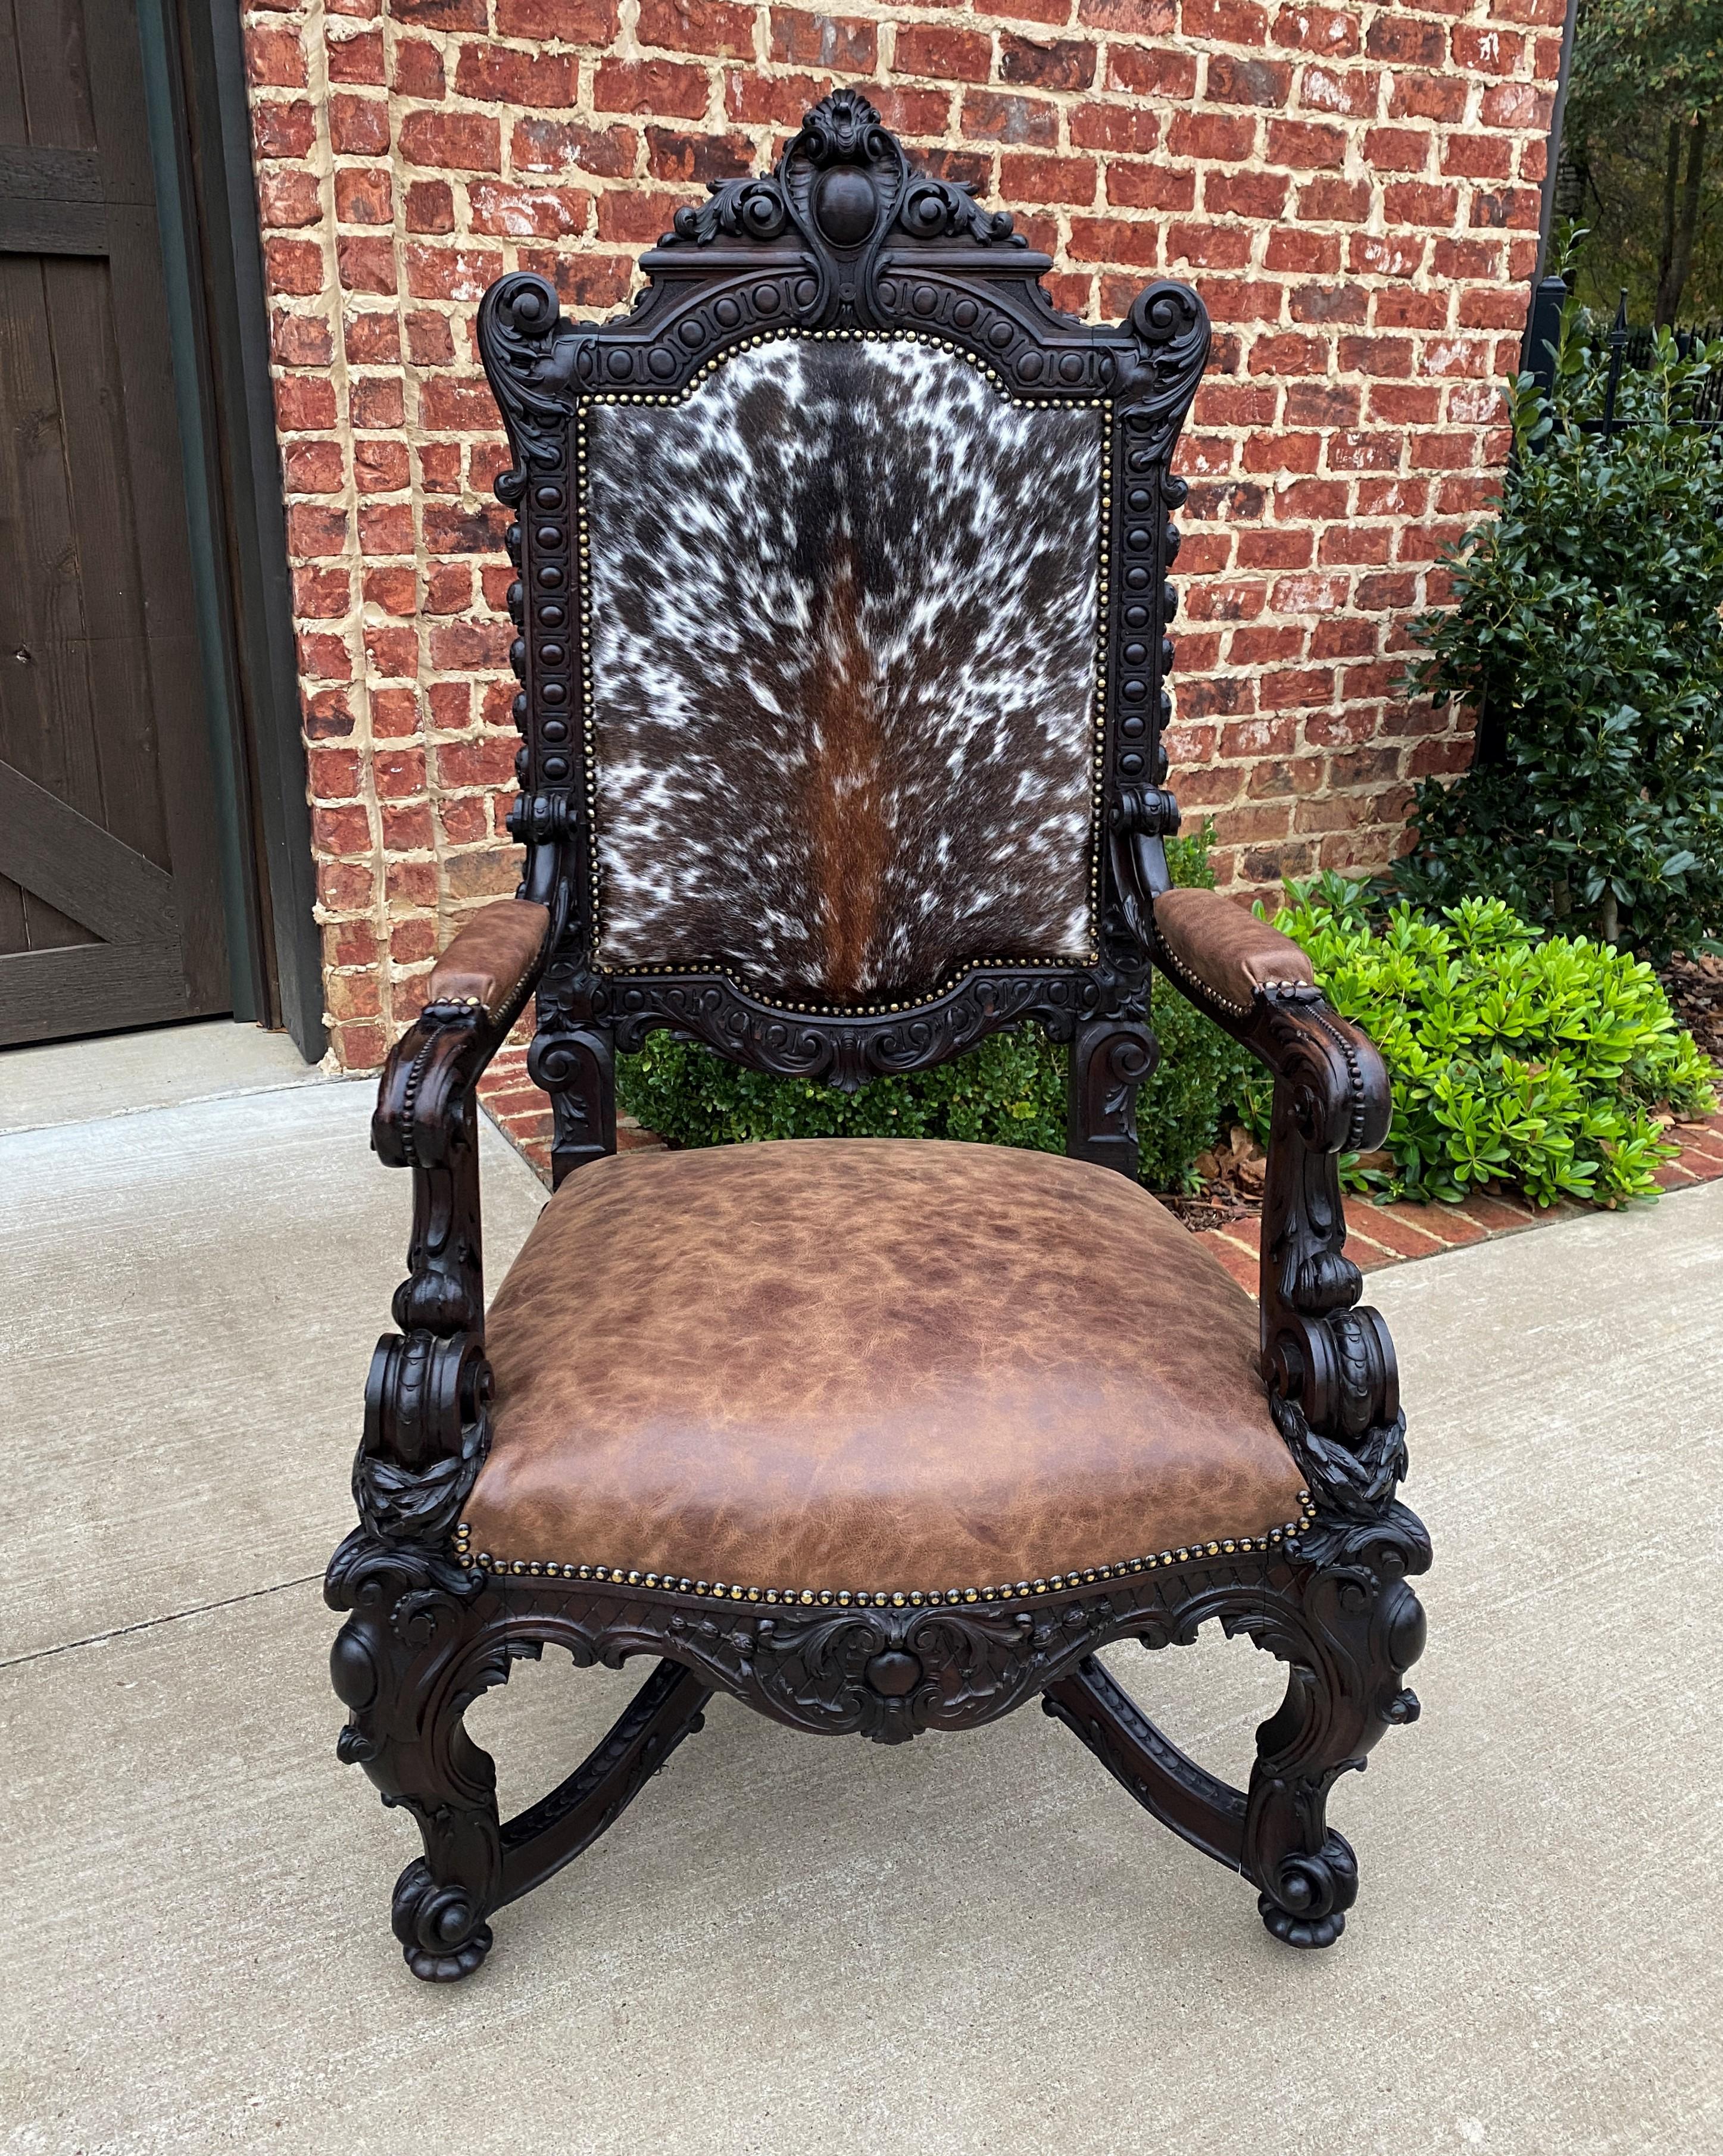 Rare antique French oak Baroque style upholstered arm chair~~Cowhide and leather~~19th century

Notice The Details in the exquisitely hand-carved crown, arms, legs, stretcher and apron~~foliate carved crest and cartouche with bead trim~~newer